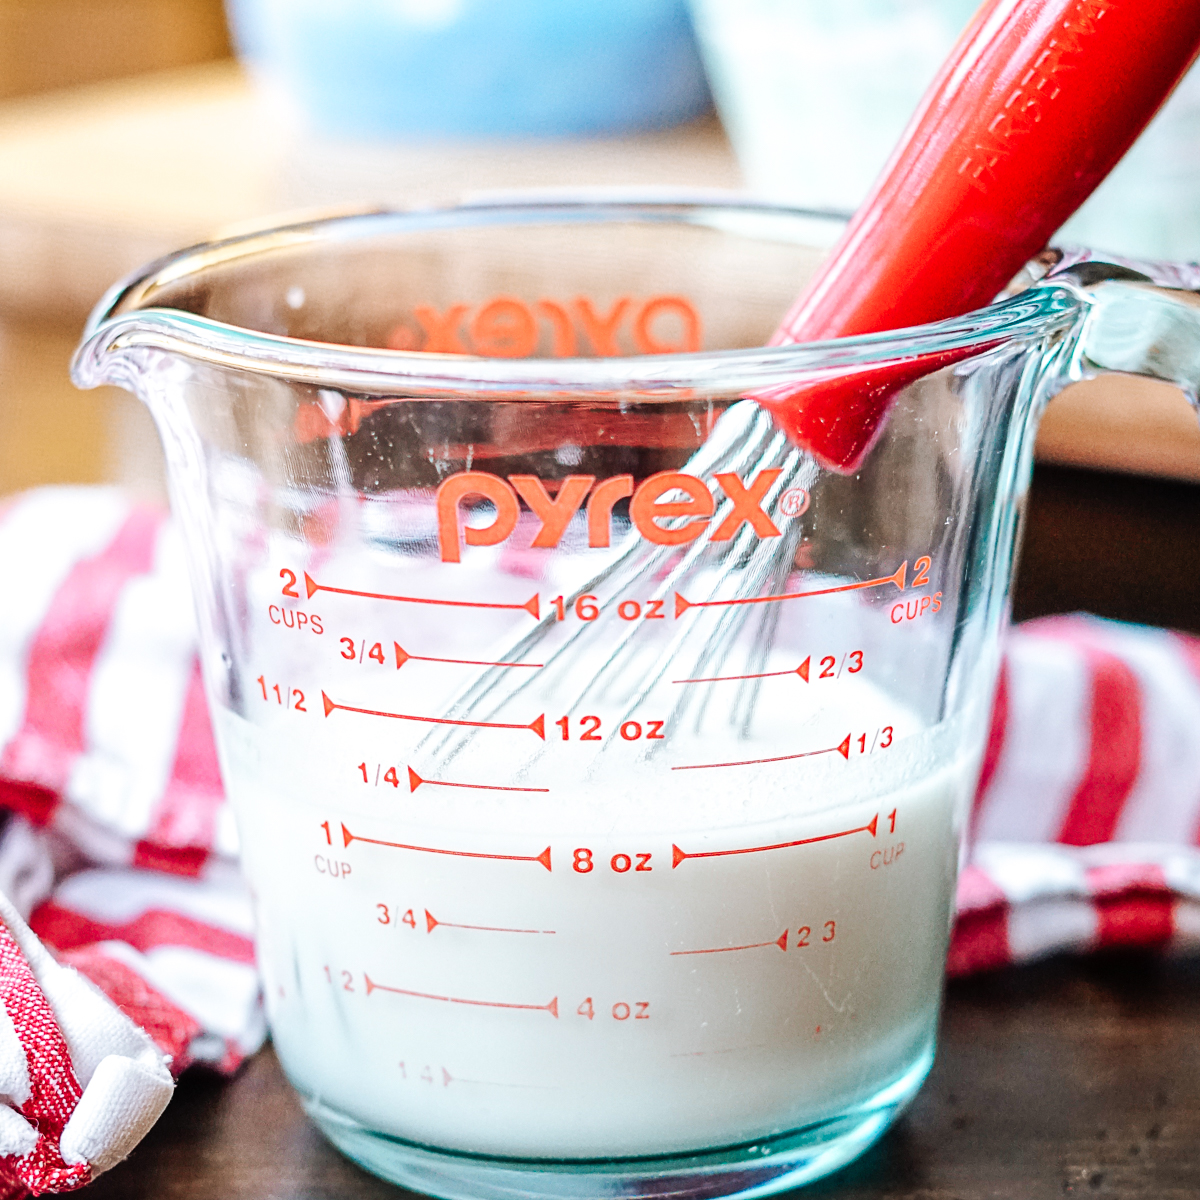 Dairy Free Buttermilk in a glass pyrex measuring cup with a red whisk and a red and white striped dish towel in the background